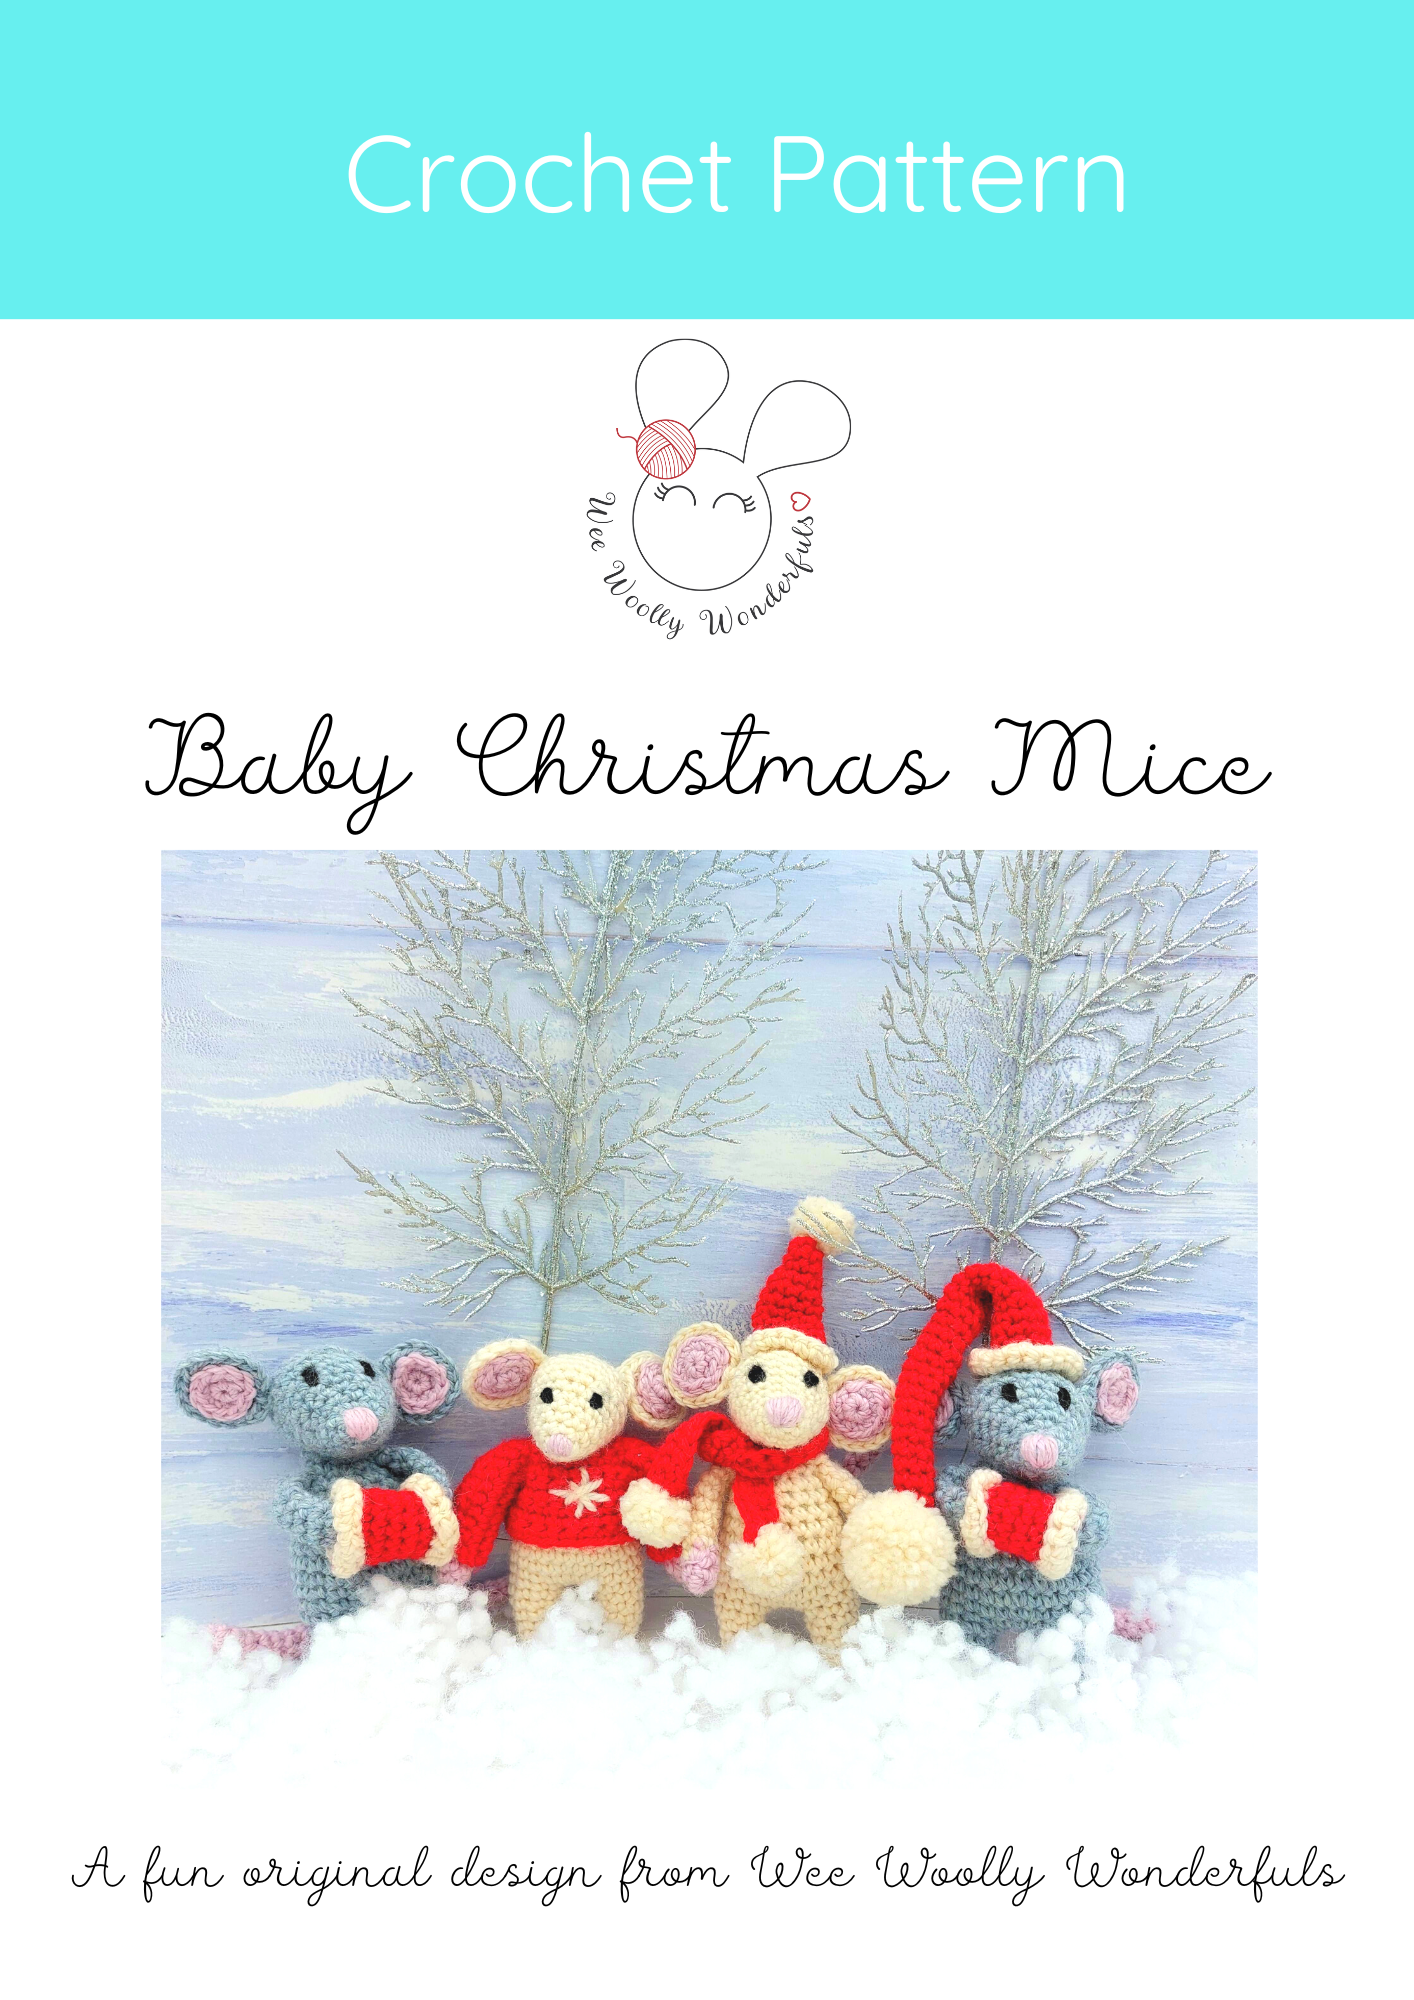 Cover - Crochet Pattern for Baby Christmas Mice